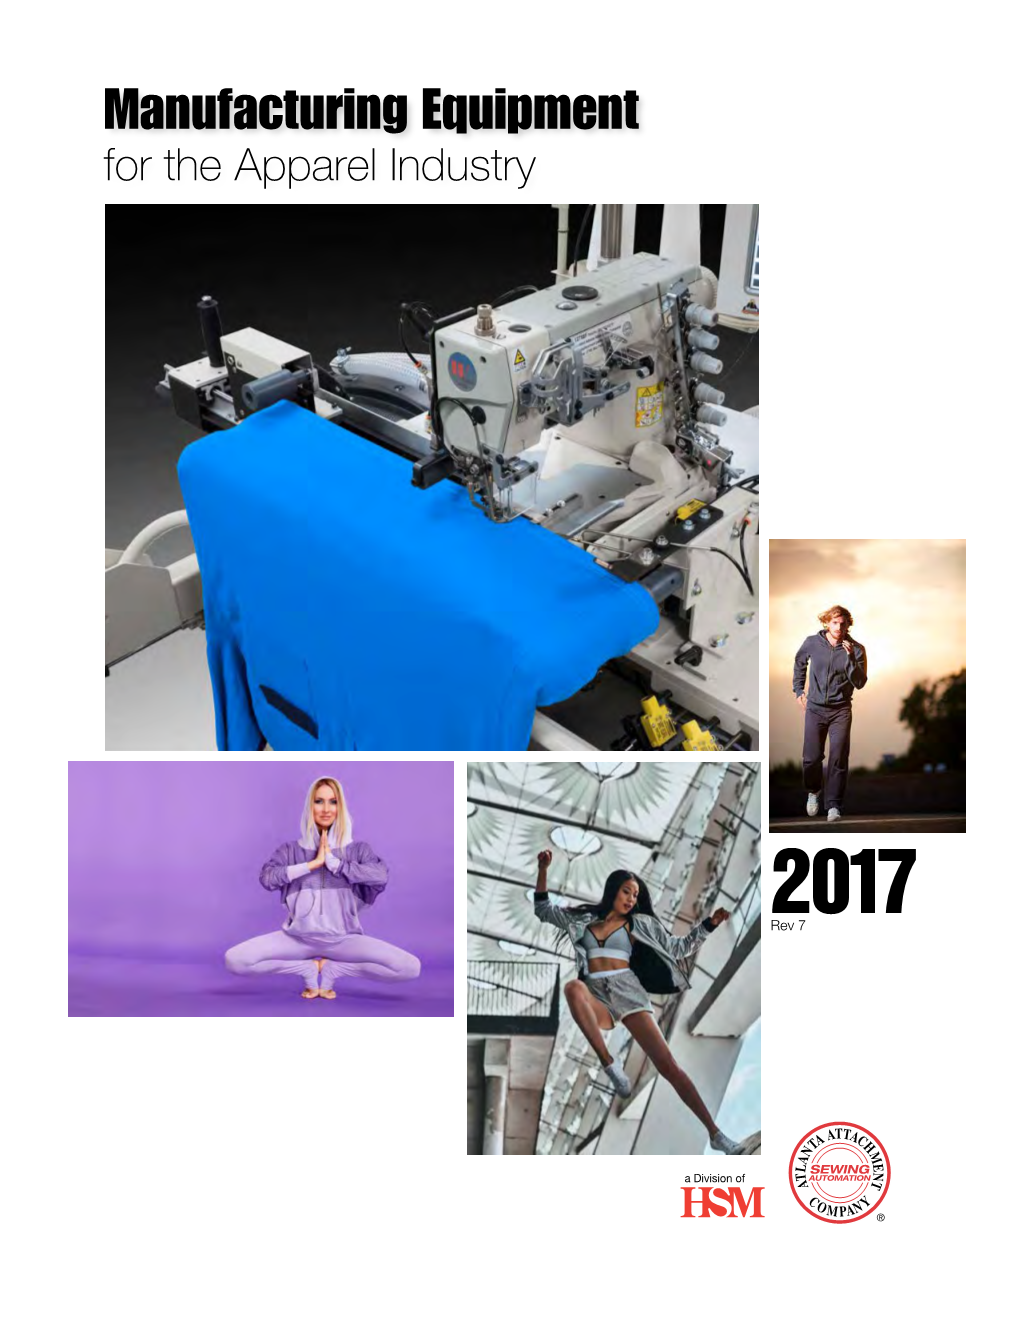 Manufacturing Equipment for the Apparel Industry